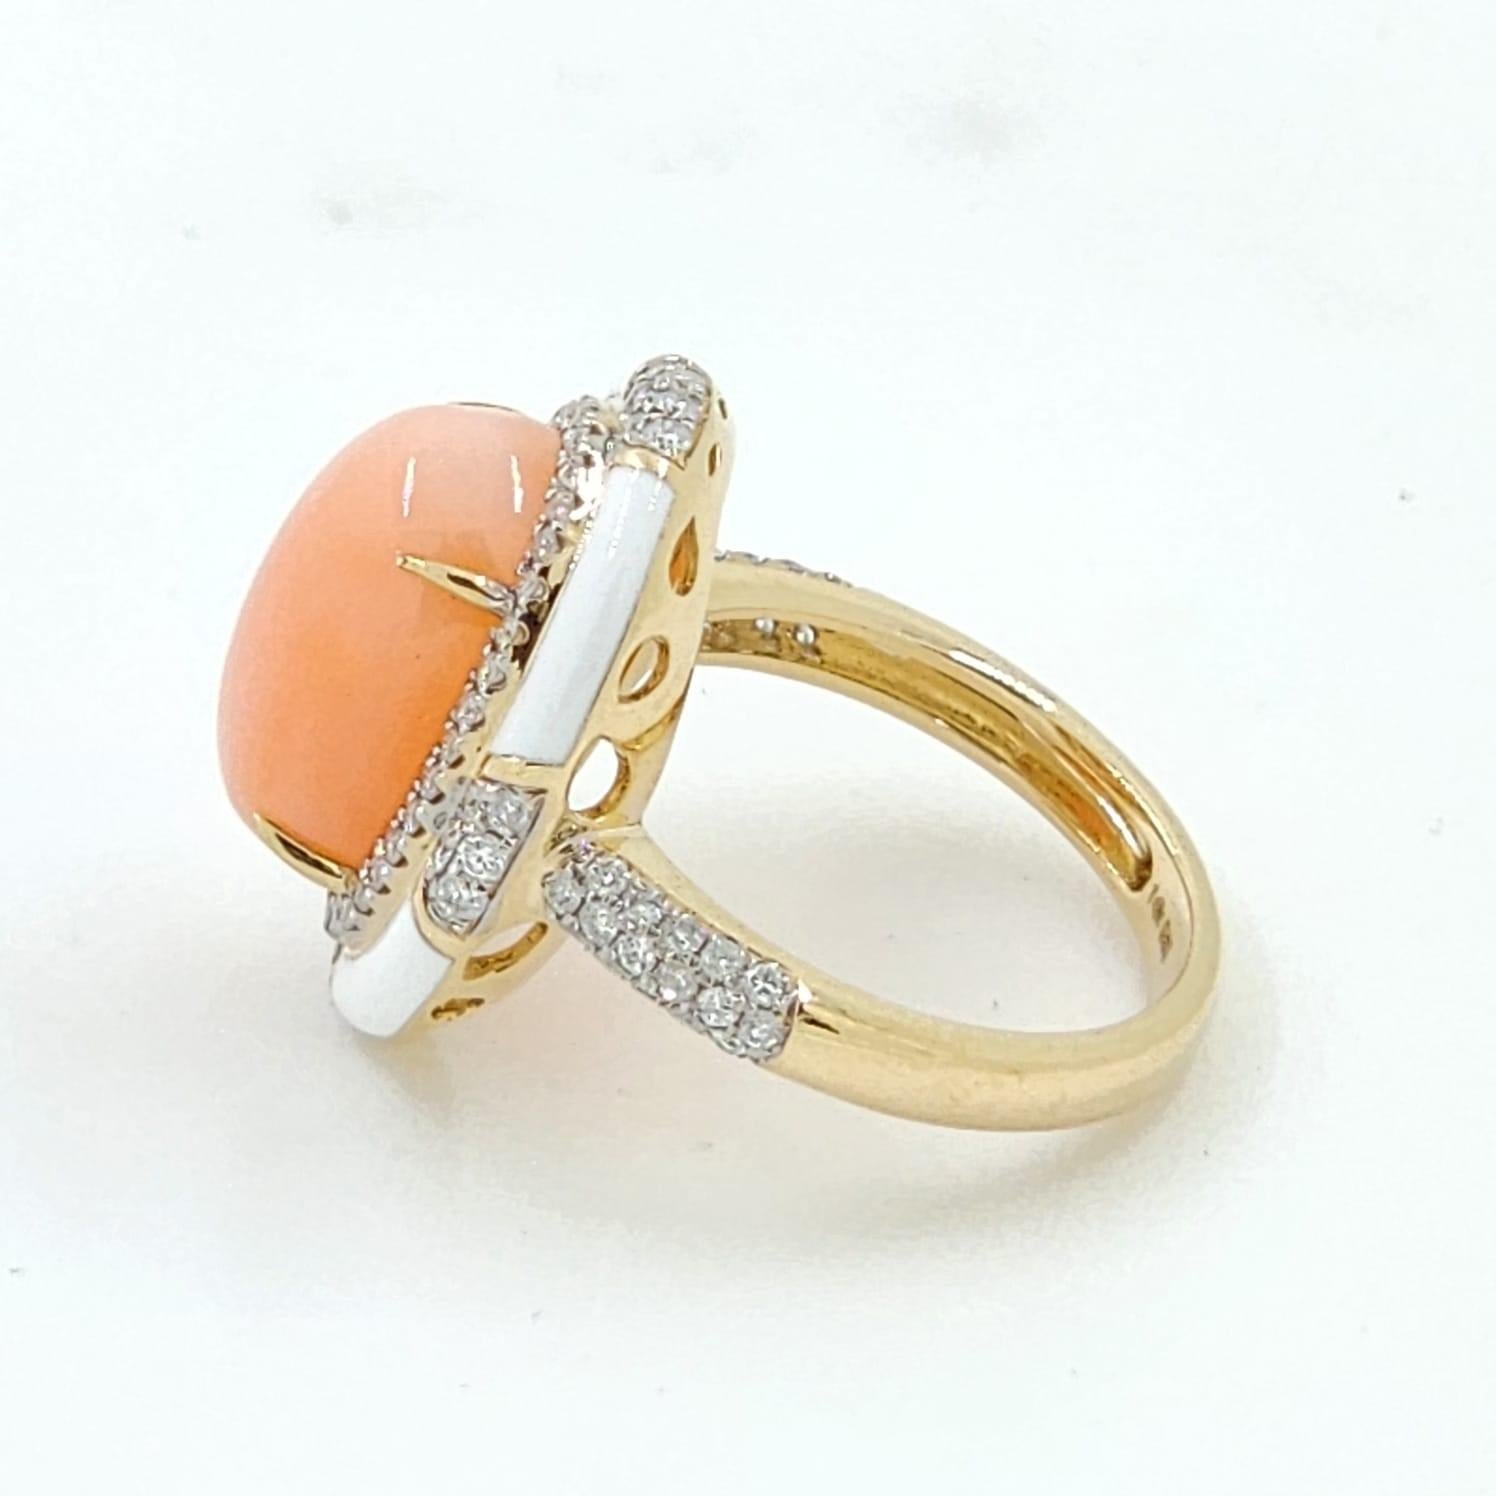 Cabochon Angle Skin Color Coral Diamond Enamel Ring in 14 Karat Yellow Gold